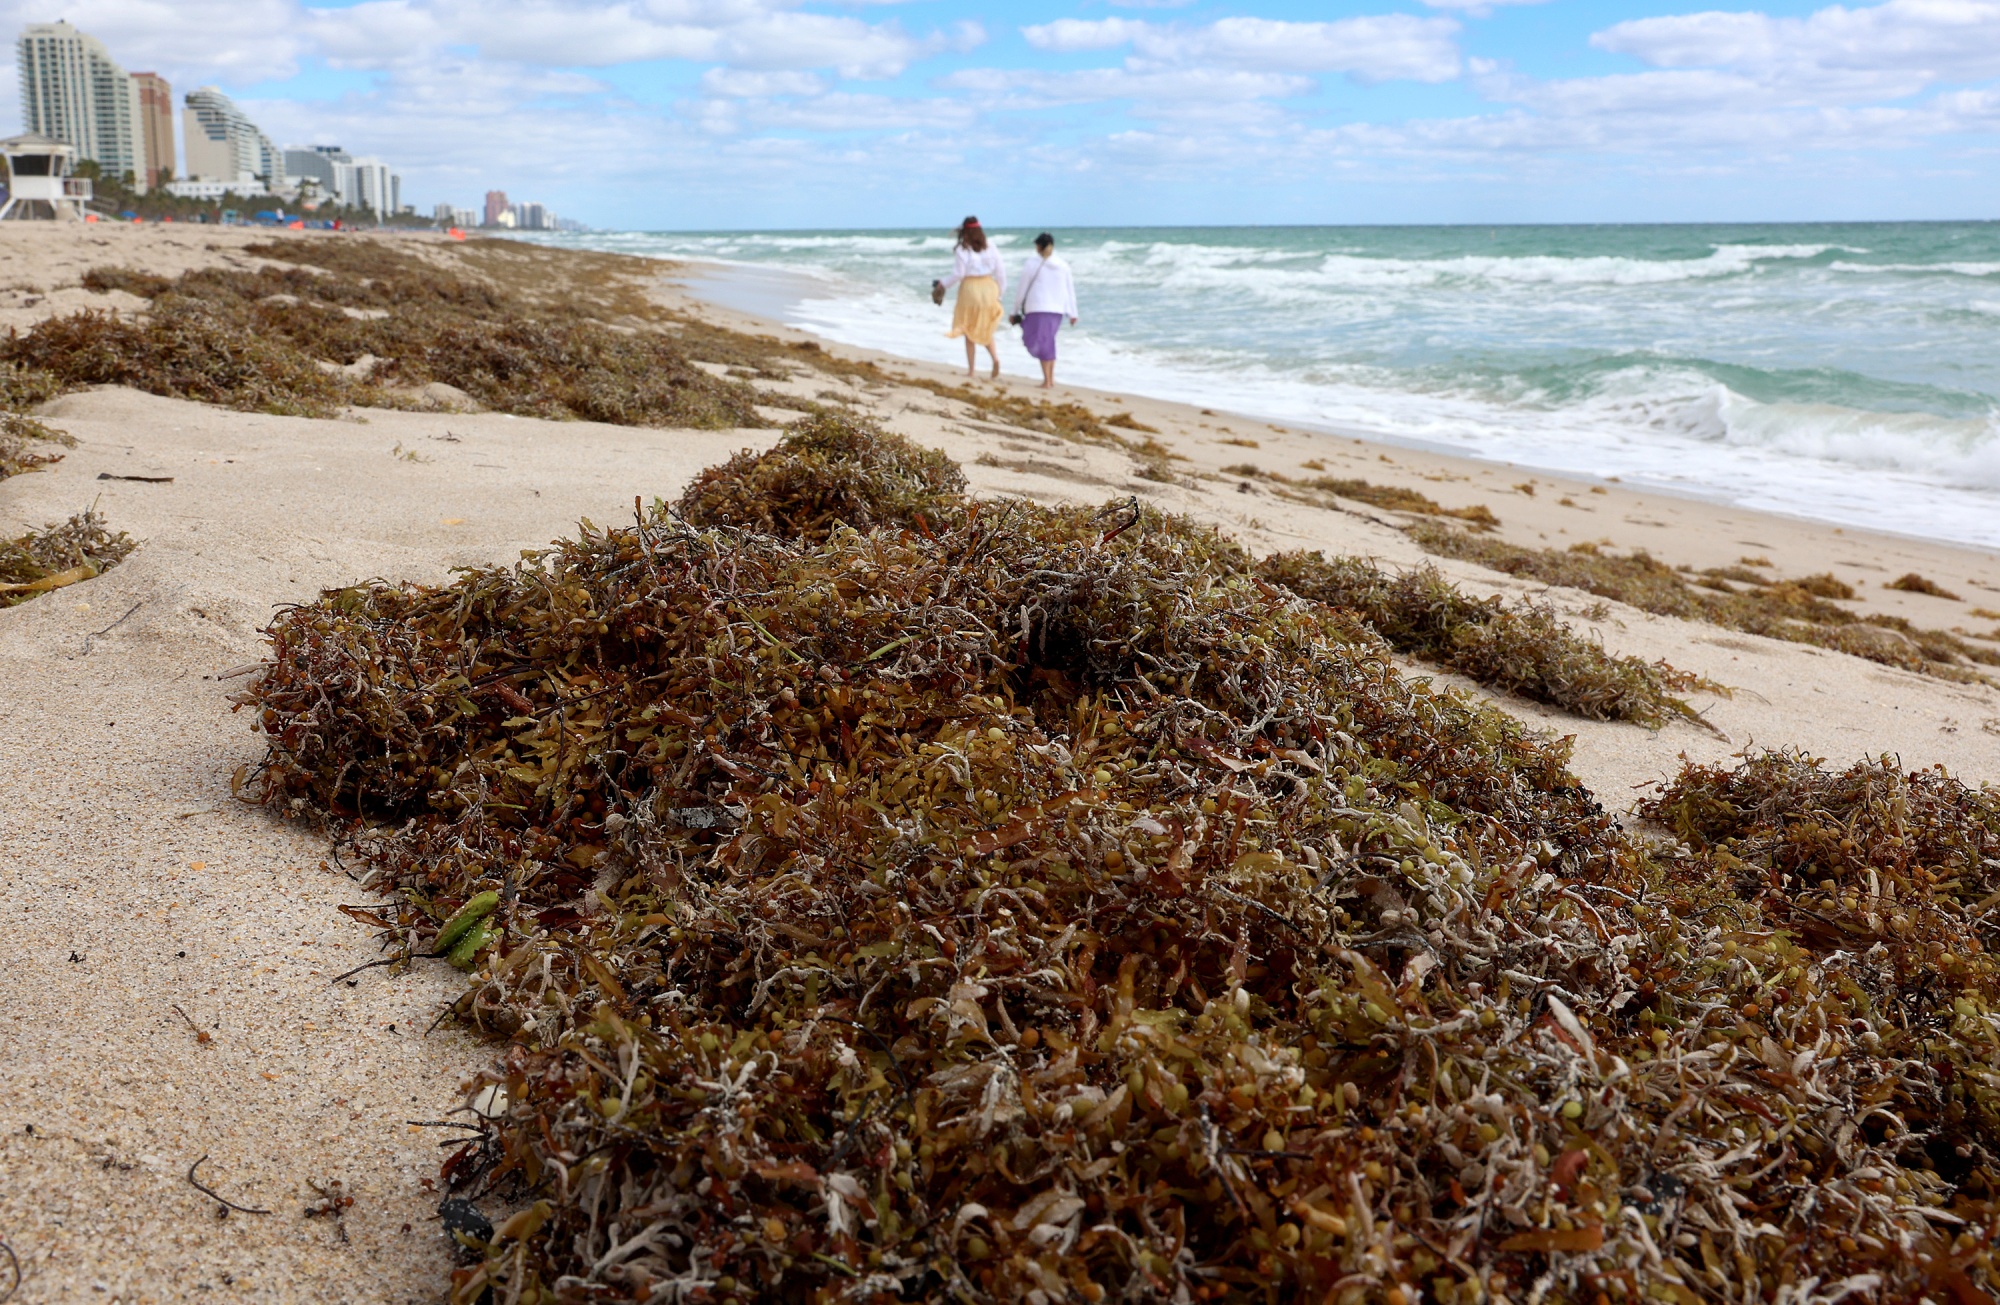 Whats Sargassum Bloom? Floridas Seaweed Blob May Offer a Climate Solution